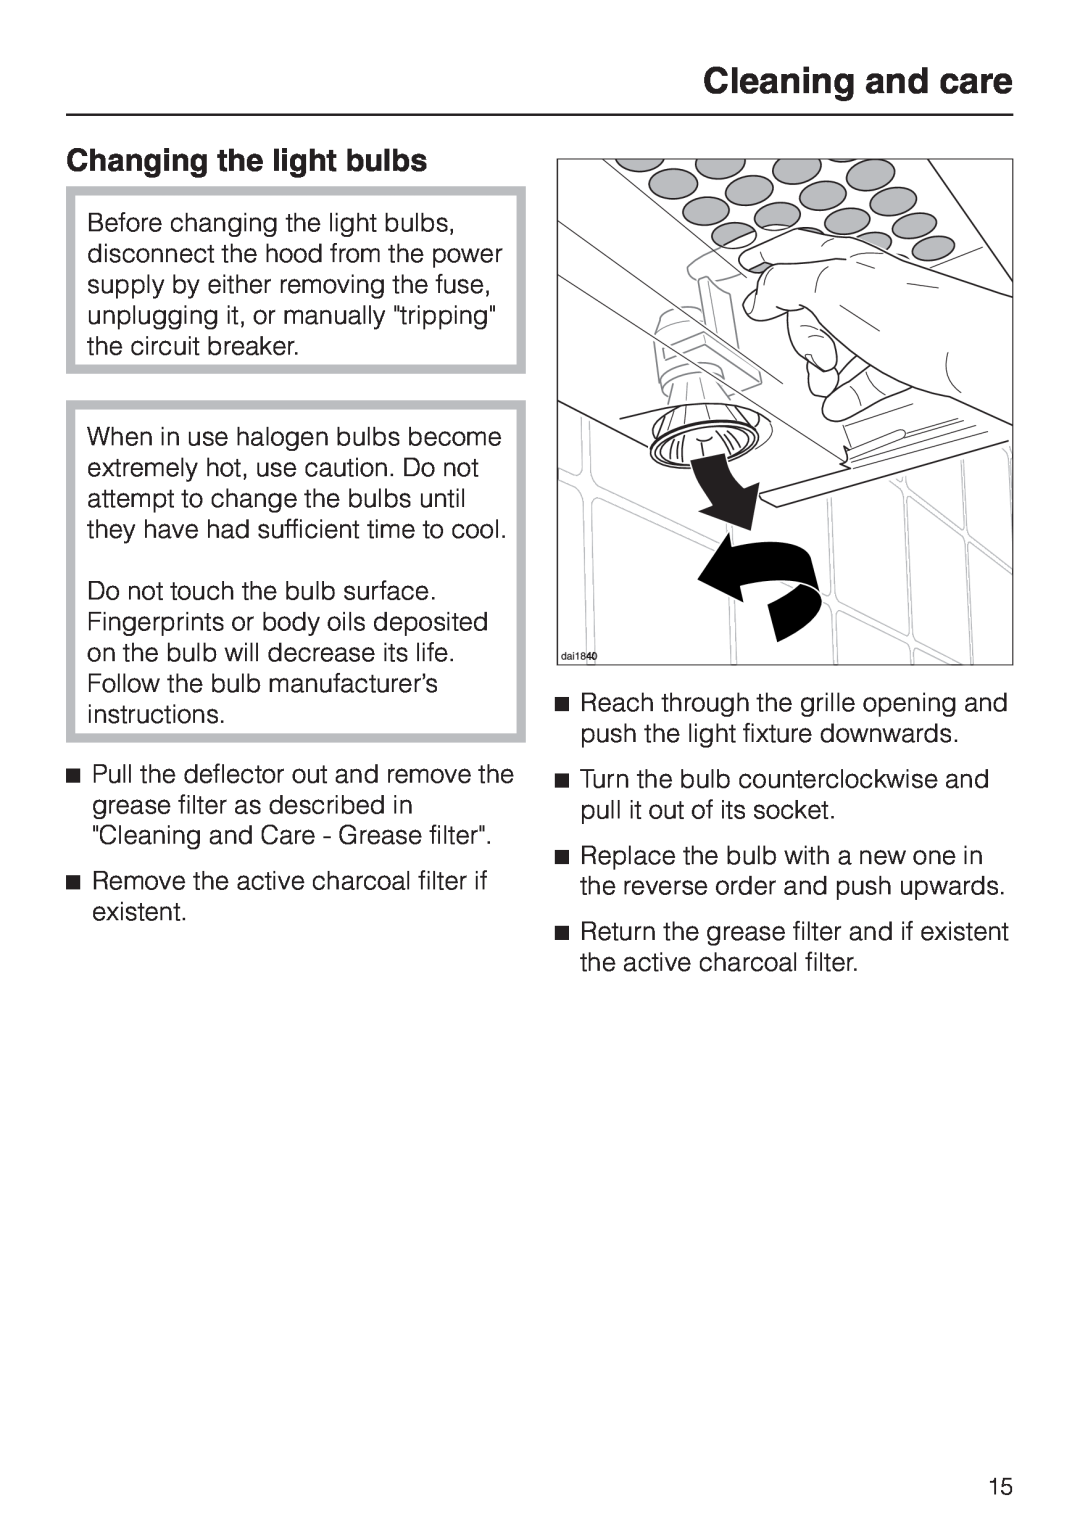 Miele DA 3180, DA3190, DA 3160 installation instructions Changing the light bulbs, Cleaning and care 